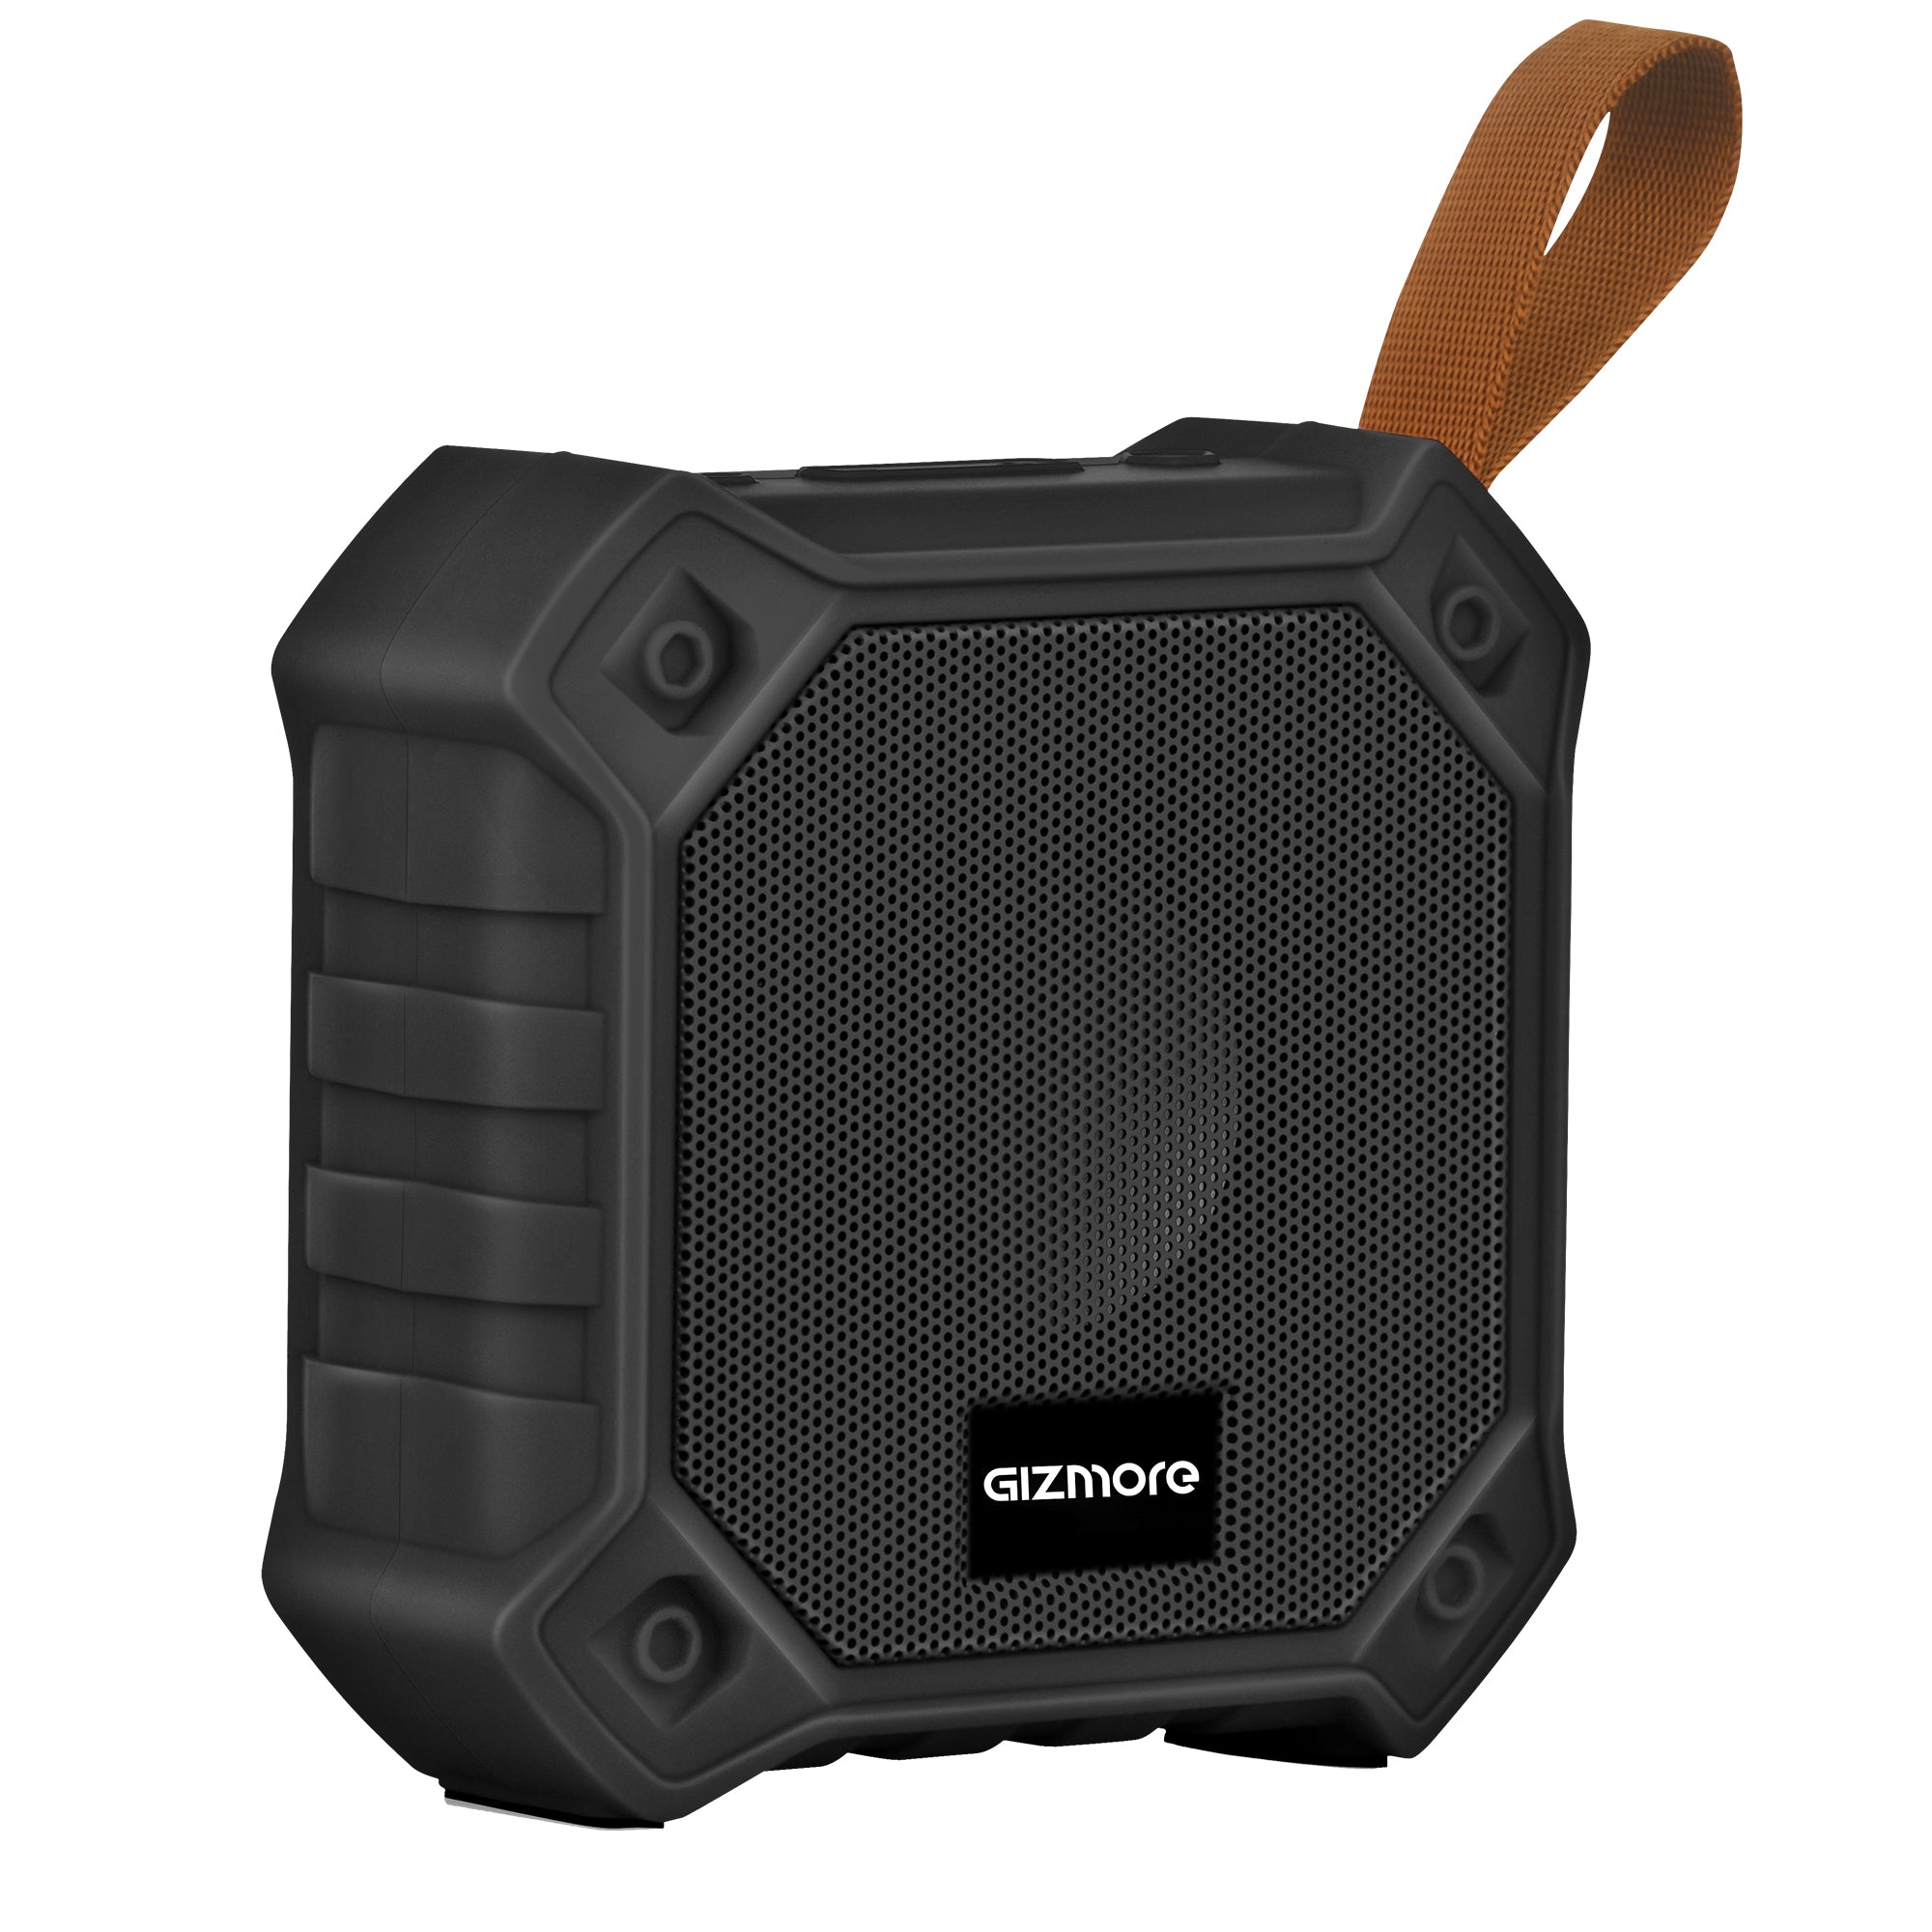 GIZMORE Cube 5W Wireless Bluetooth Portable Speaker| Play Back Time 12hrs|In-Built Mic for Calling |TWS Function|52MM Dynamic Bass Driver| Multiple connectivity SD Card & USB (Black)